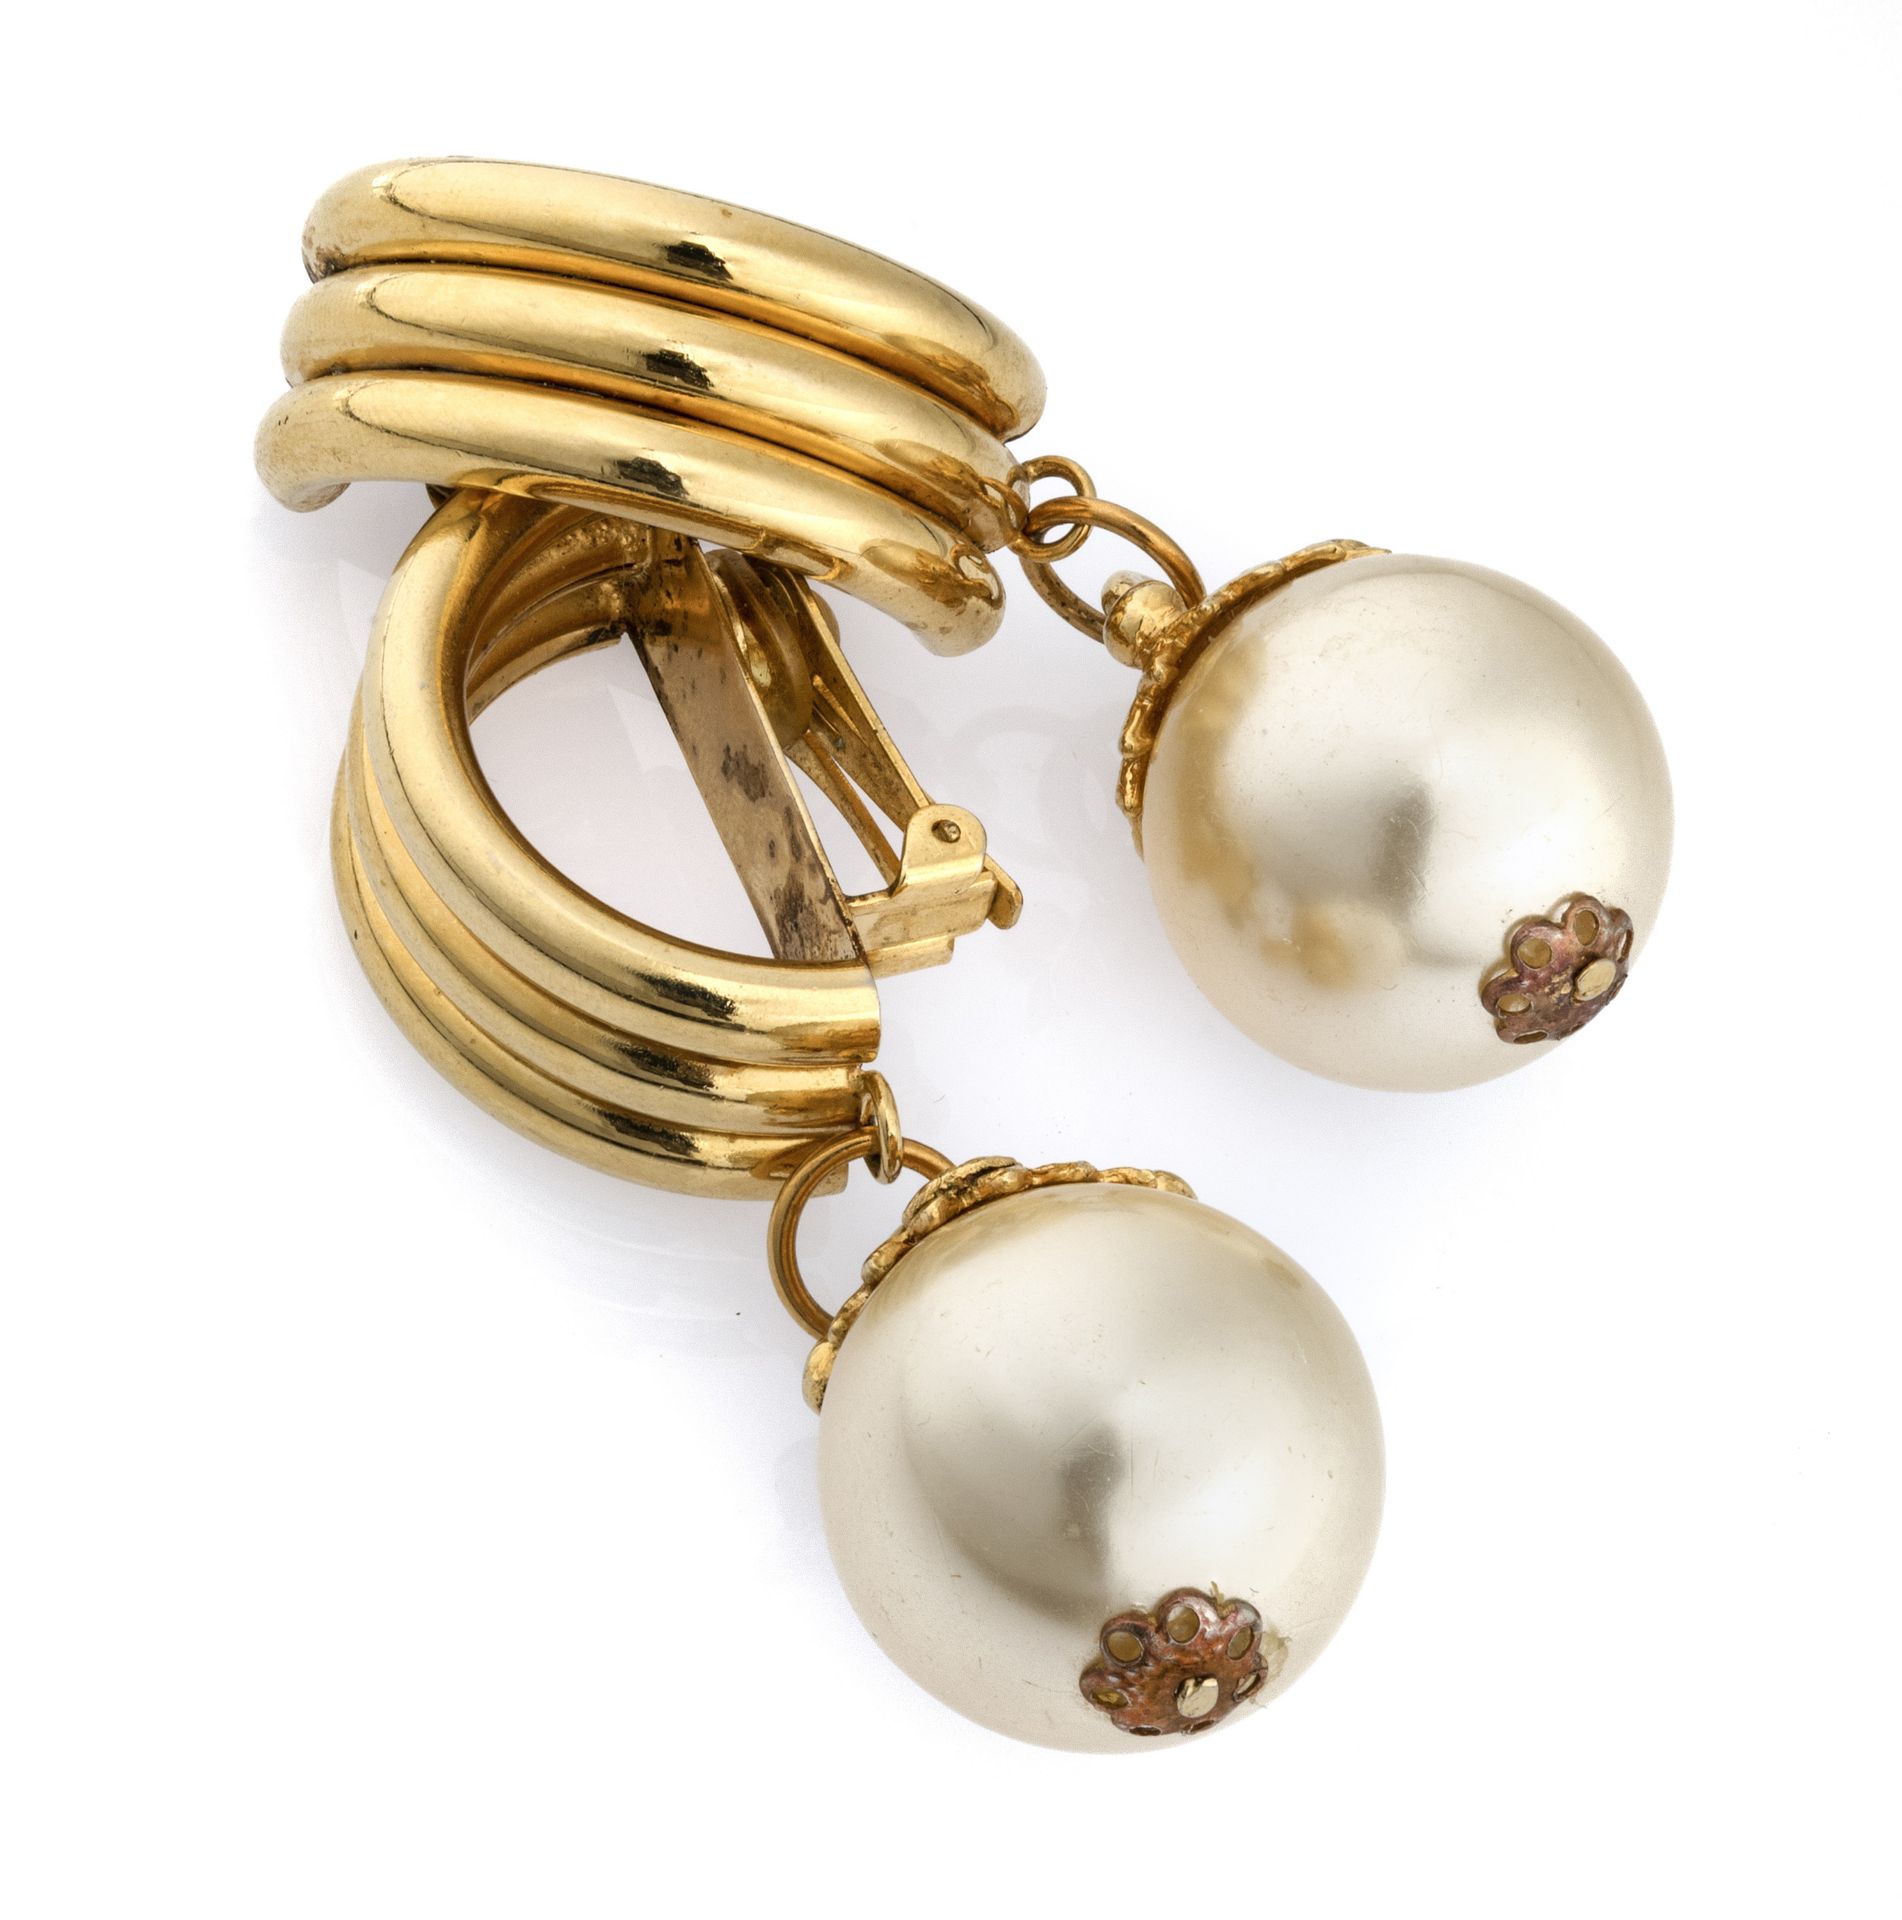 GILDED EARRINGS WITH PEARLS